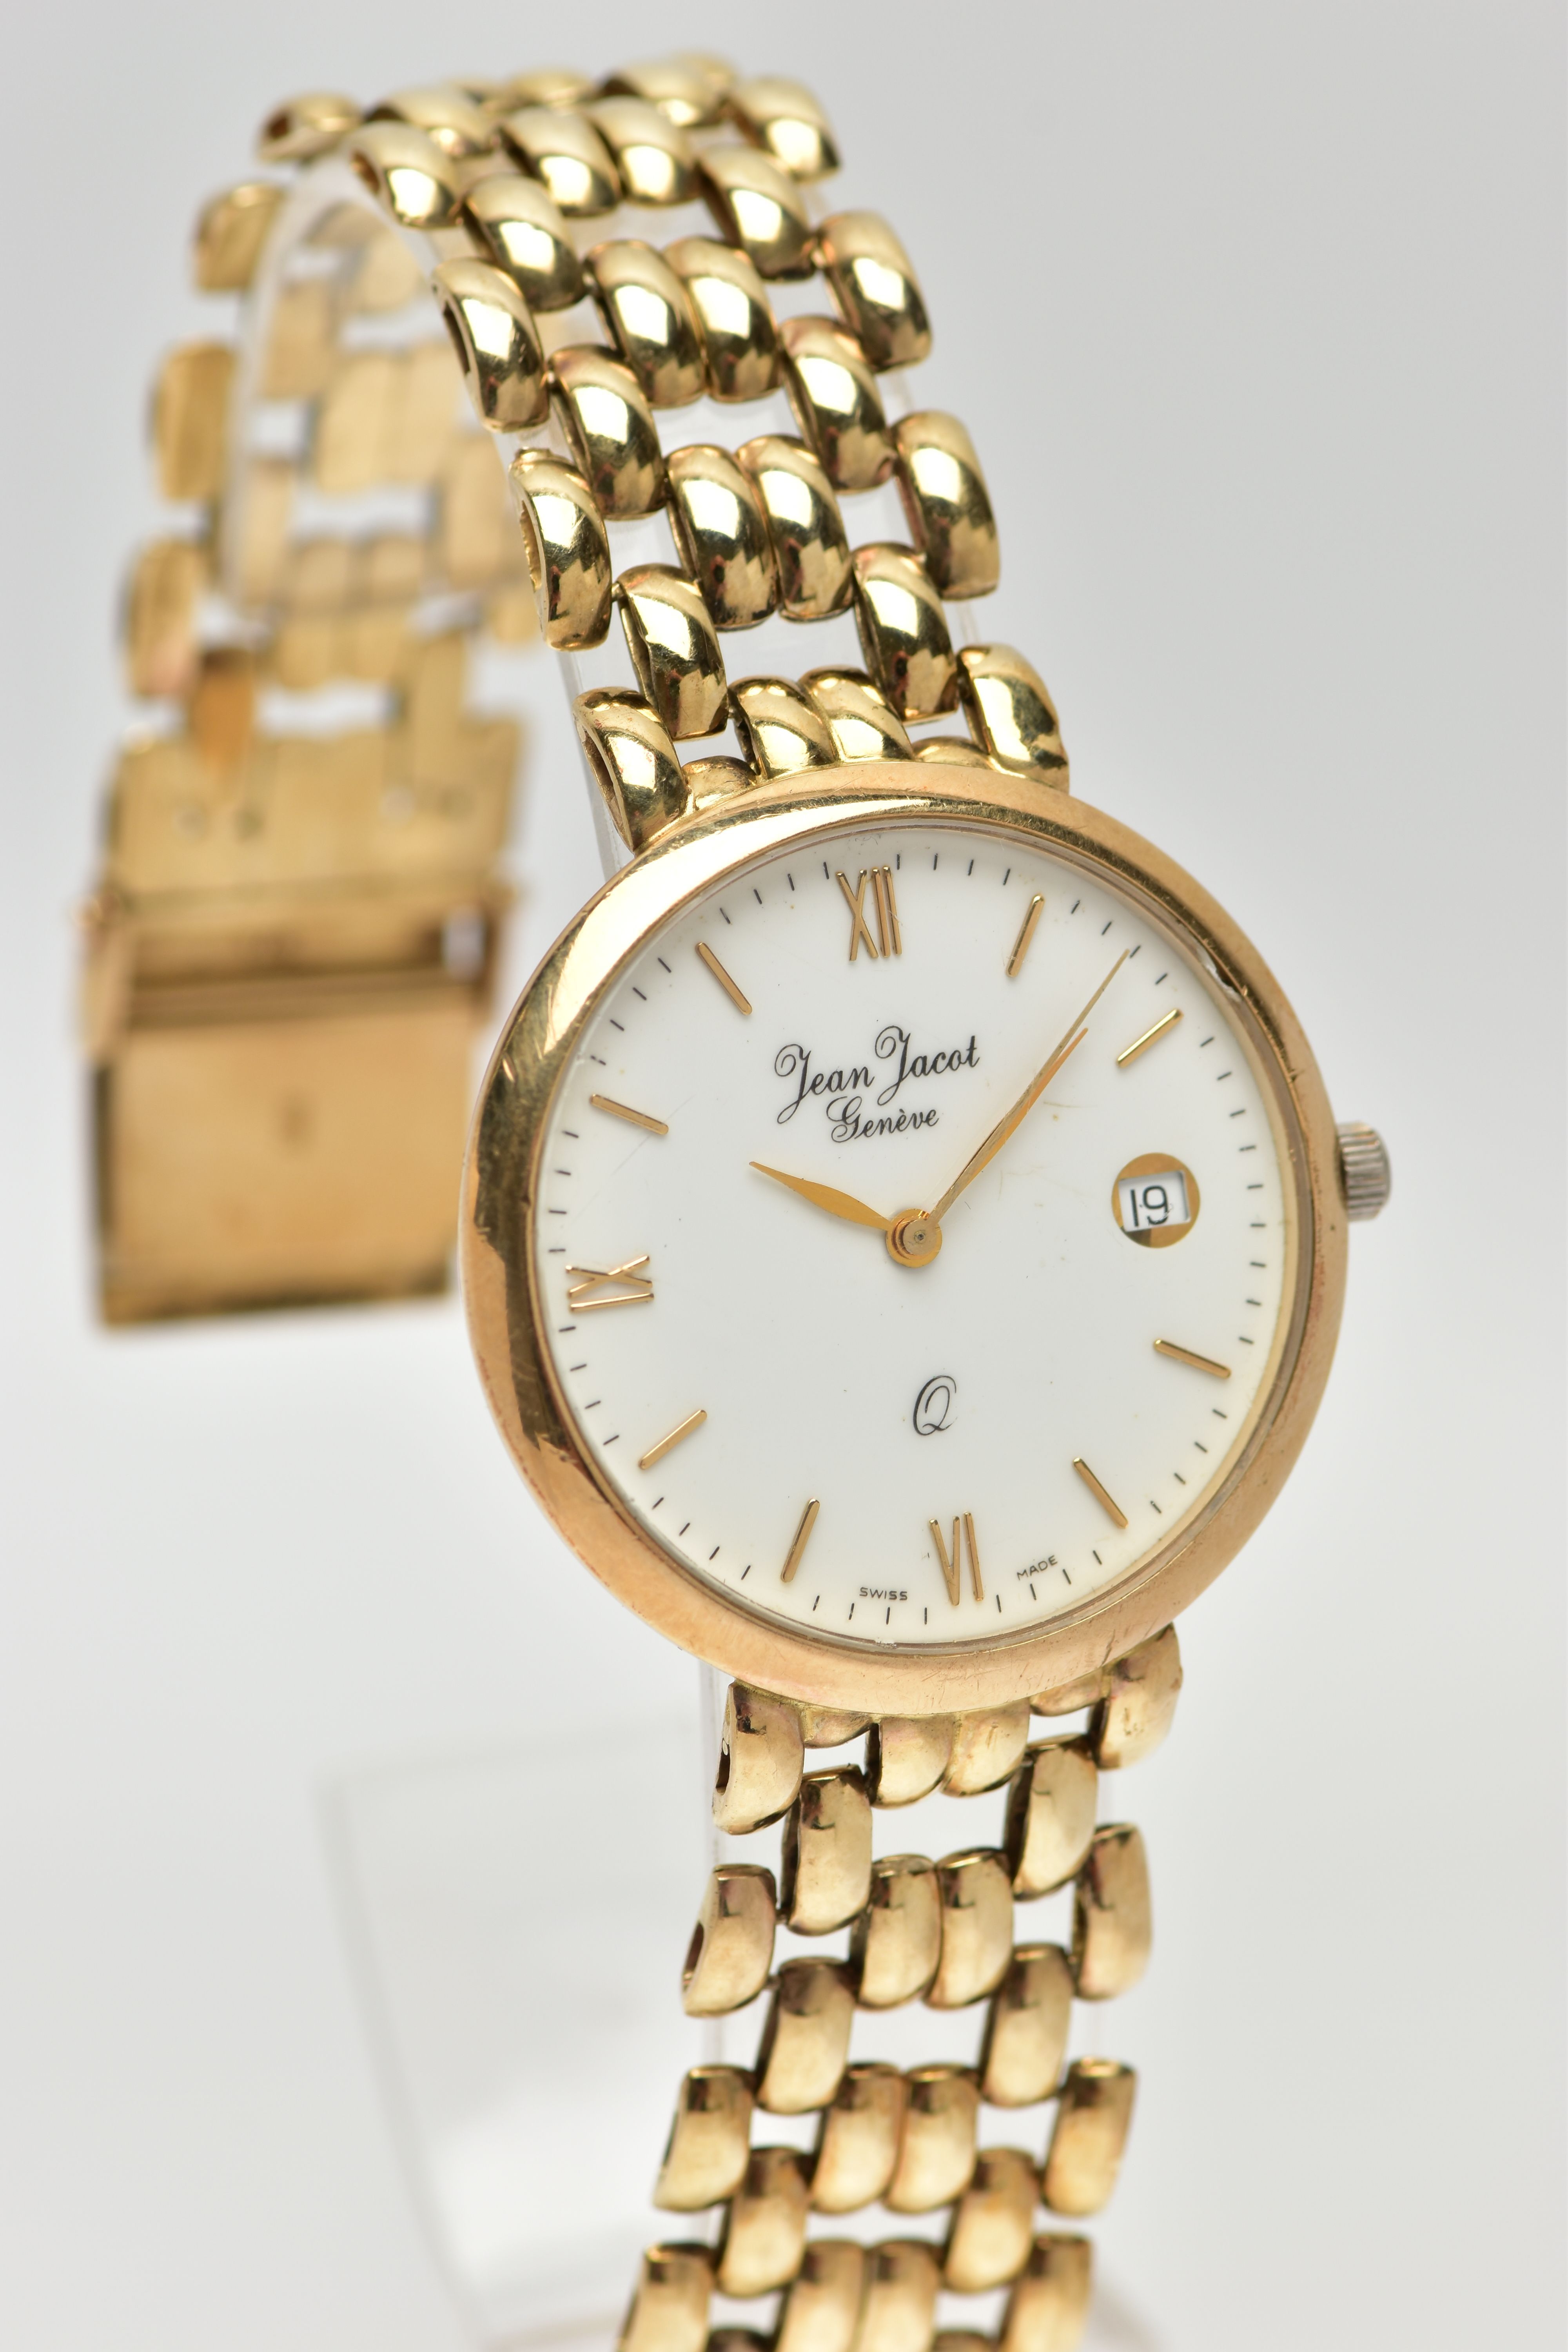 A JEAN JACOT GENEVE YELLOW METAL QUARTZ WRISTWATCH, the white dial with gold tone hourly applied - Image 2 of 6